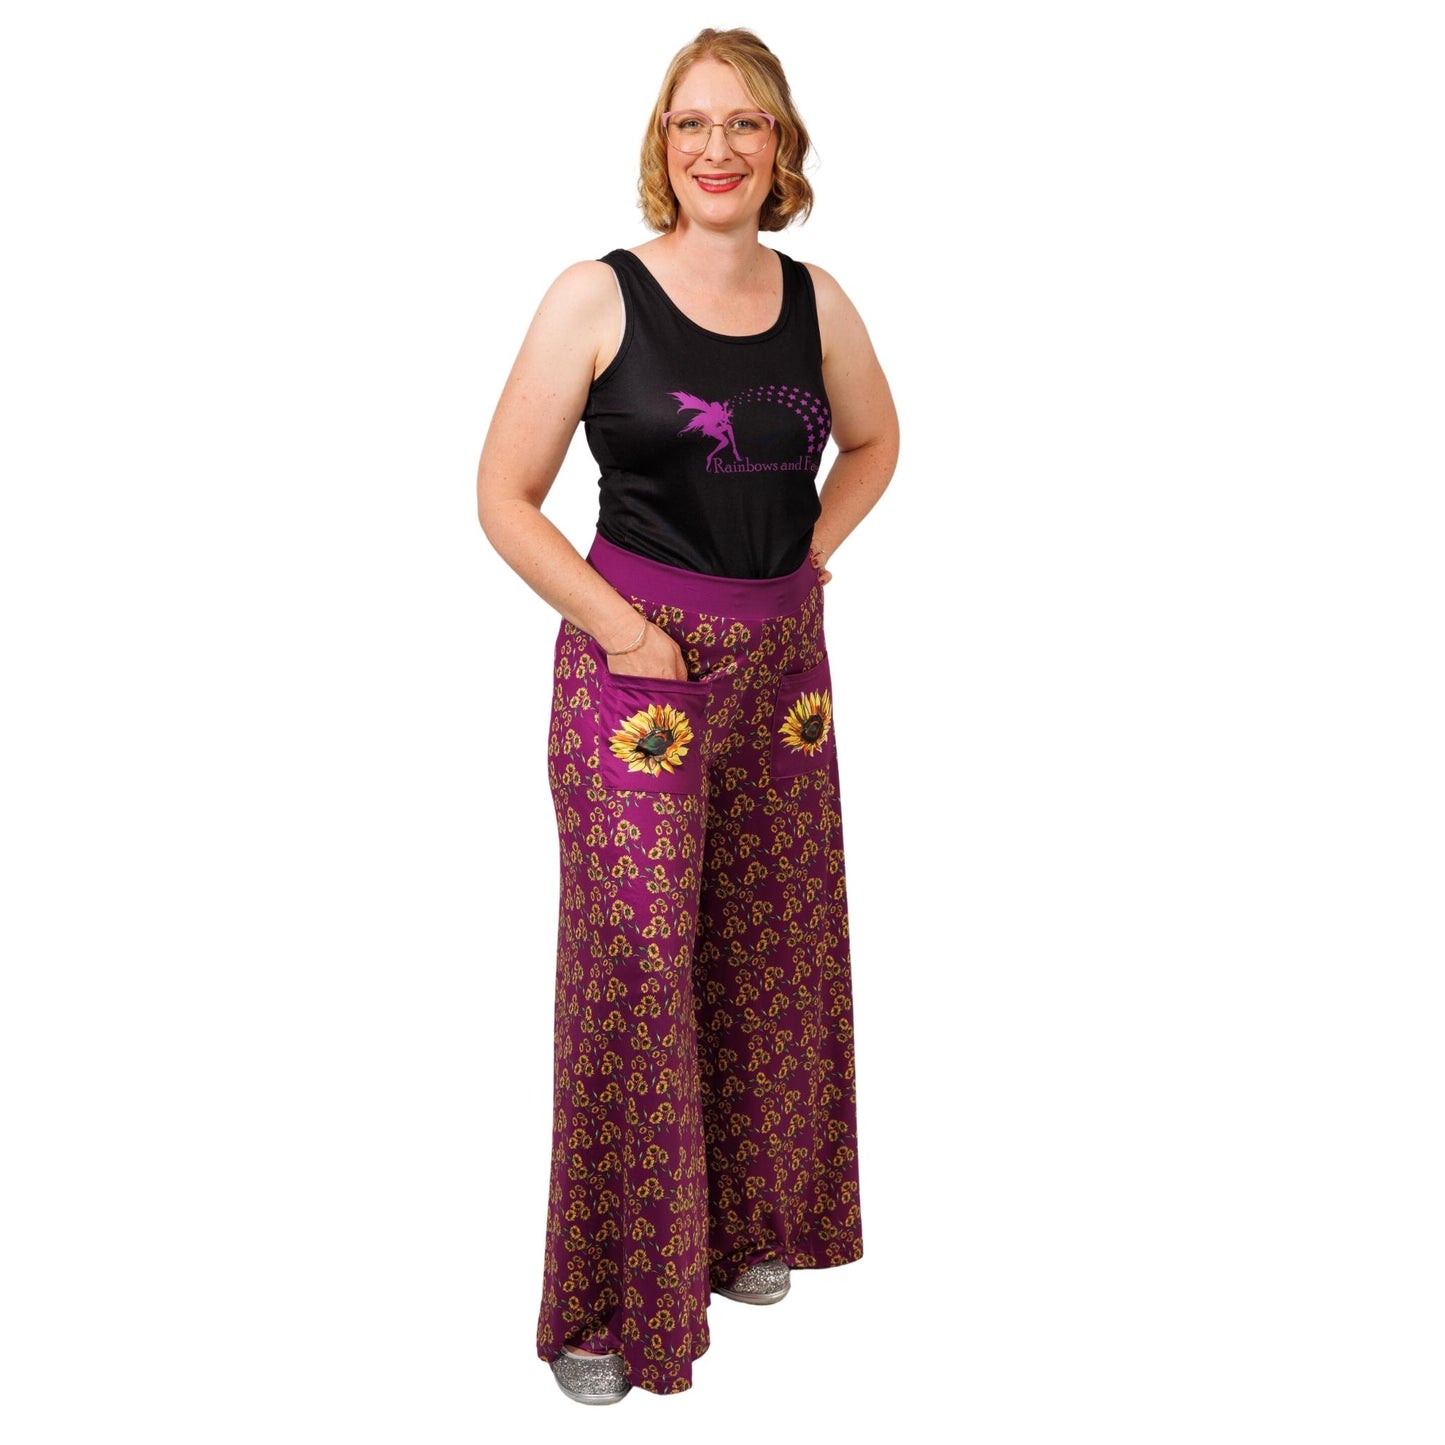 Sunflower Wide Leg Pants by RainbowsAndFairies.com.au (Sunflowers - Flowers - Floral Print - Vintage Inspired - Flares - Pants With Pockets) - SKU: CL_WIDEL_SUNFL_ORG - Pic-02